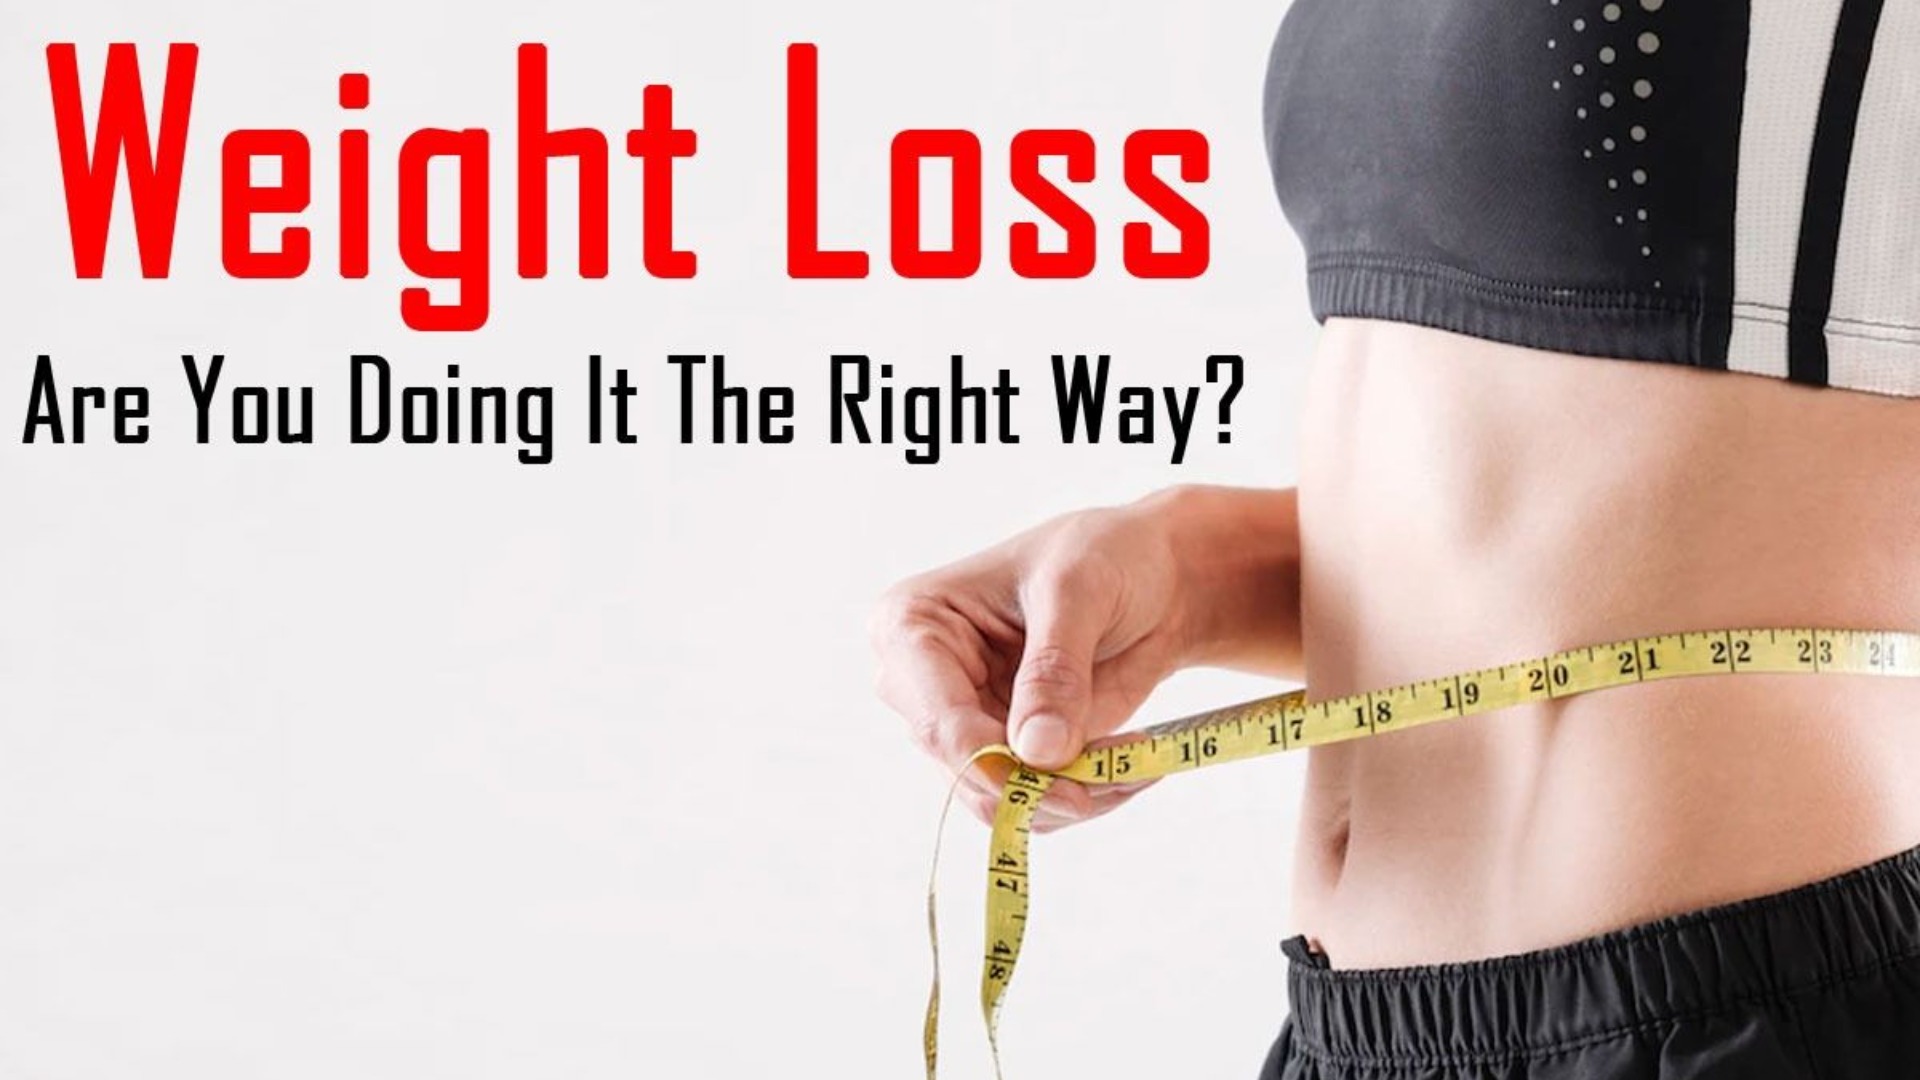 Burn Fat Fast With This New Diet Pill: Discover the 15 Ways Phytodren Can Help You Lose Weight